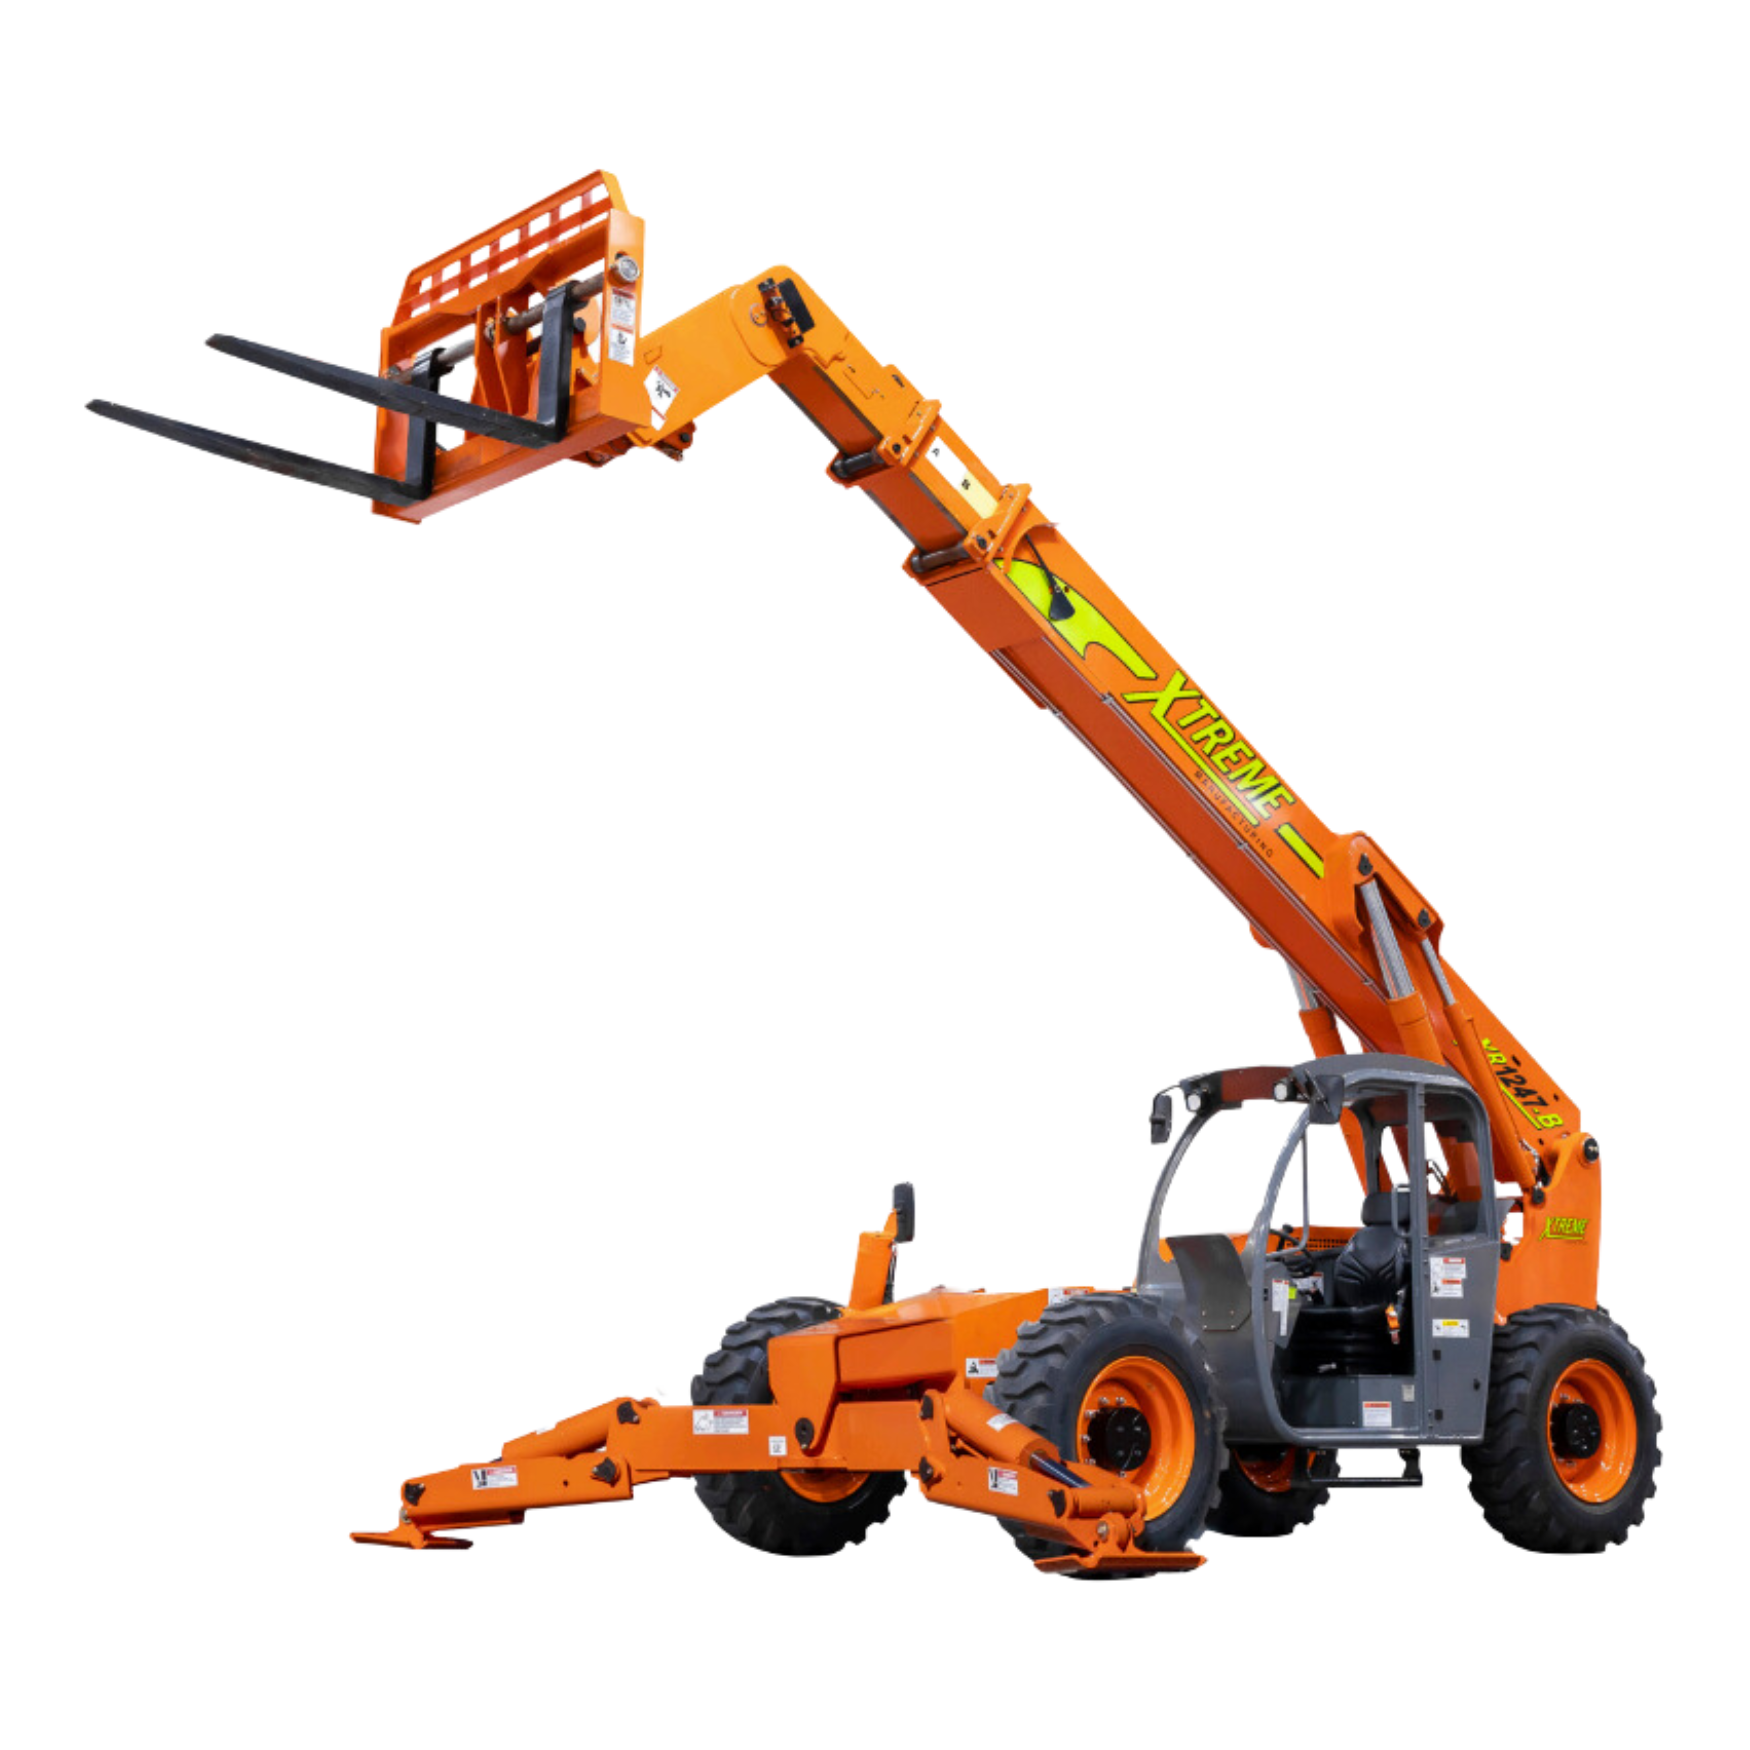 Featured image for “XTREME 12K ENGINE POWERED HIGH PIVOT ROLLER BOOM TELEHANDLER”